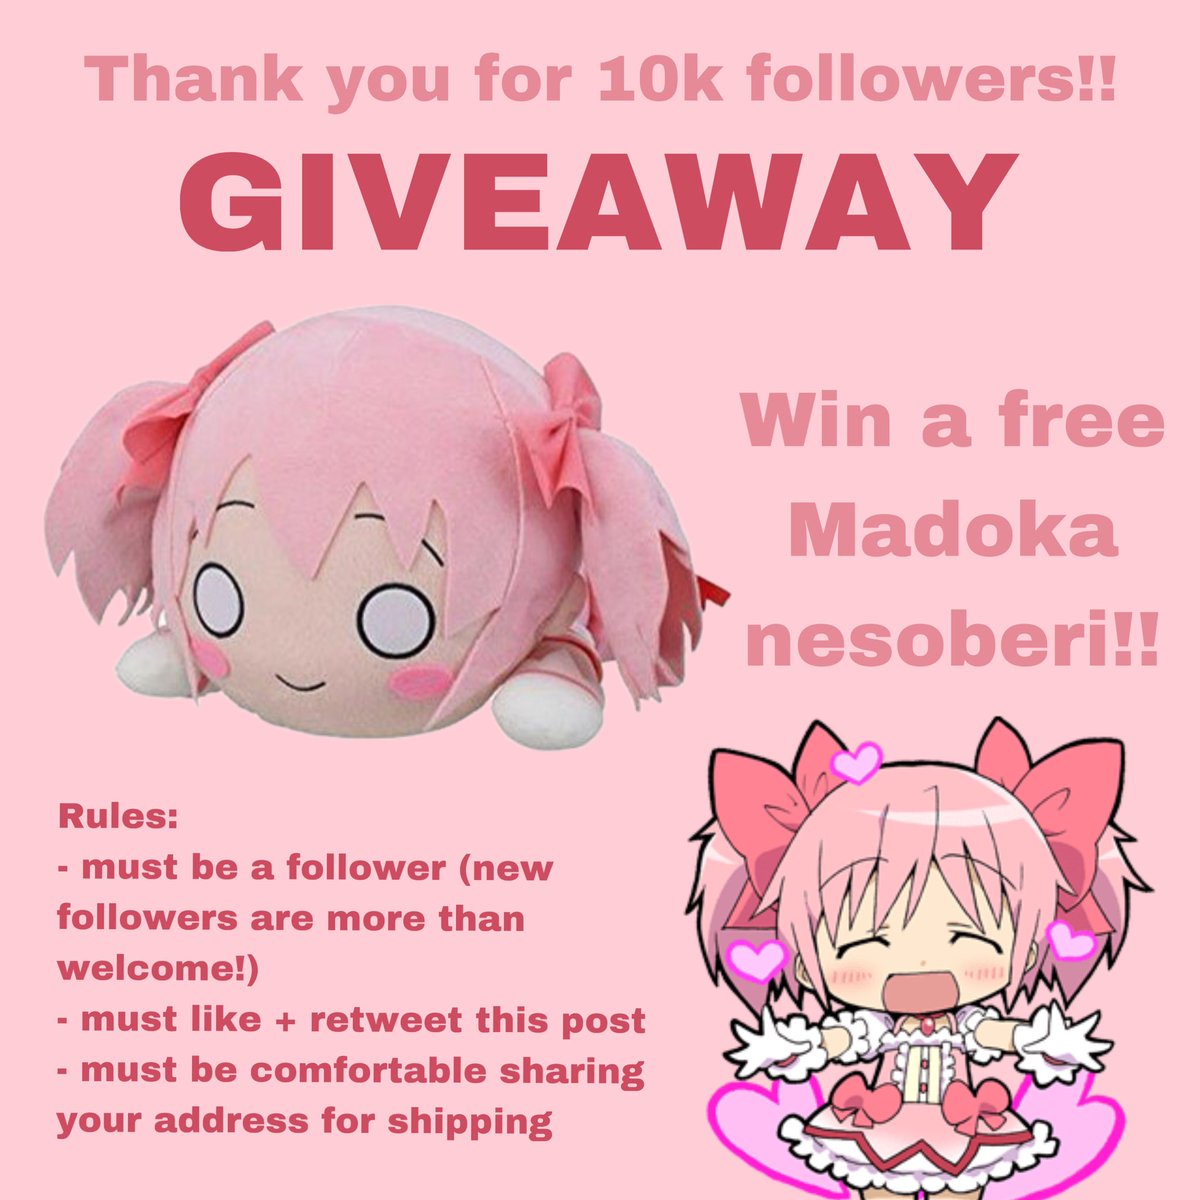 Thank you all so much for 10k followers!! Because of this, I’ve decided to hold a giveaway for a Madoka nesoberi!! Rules: - must be a follower (new followers are welcome) - like and rt this post - must be comfortable sharing your address for shipping if you win Thank you all!!